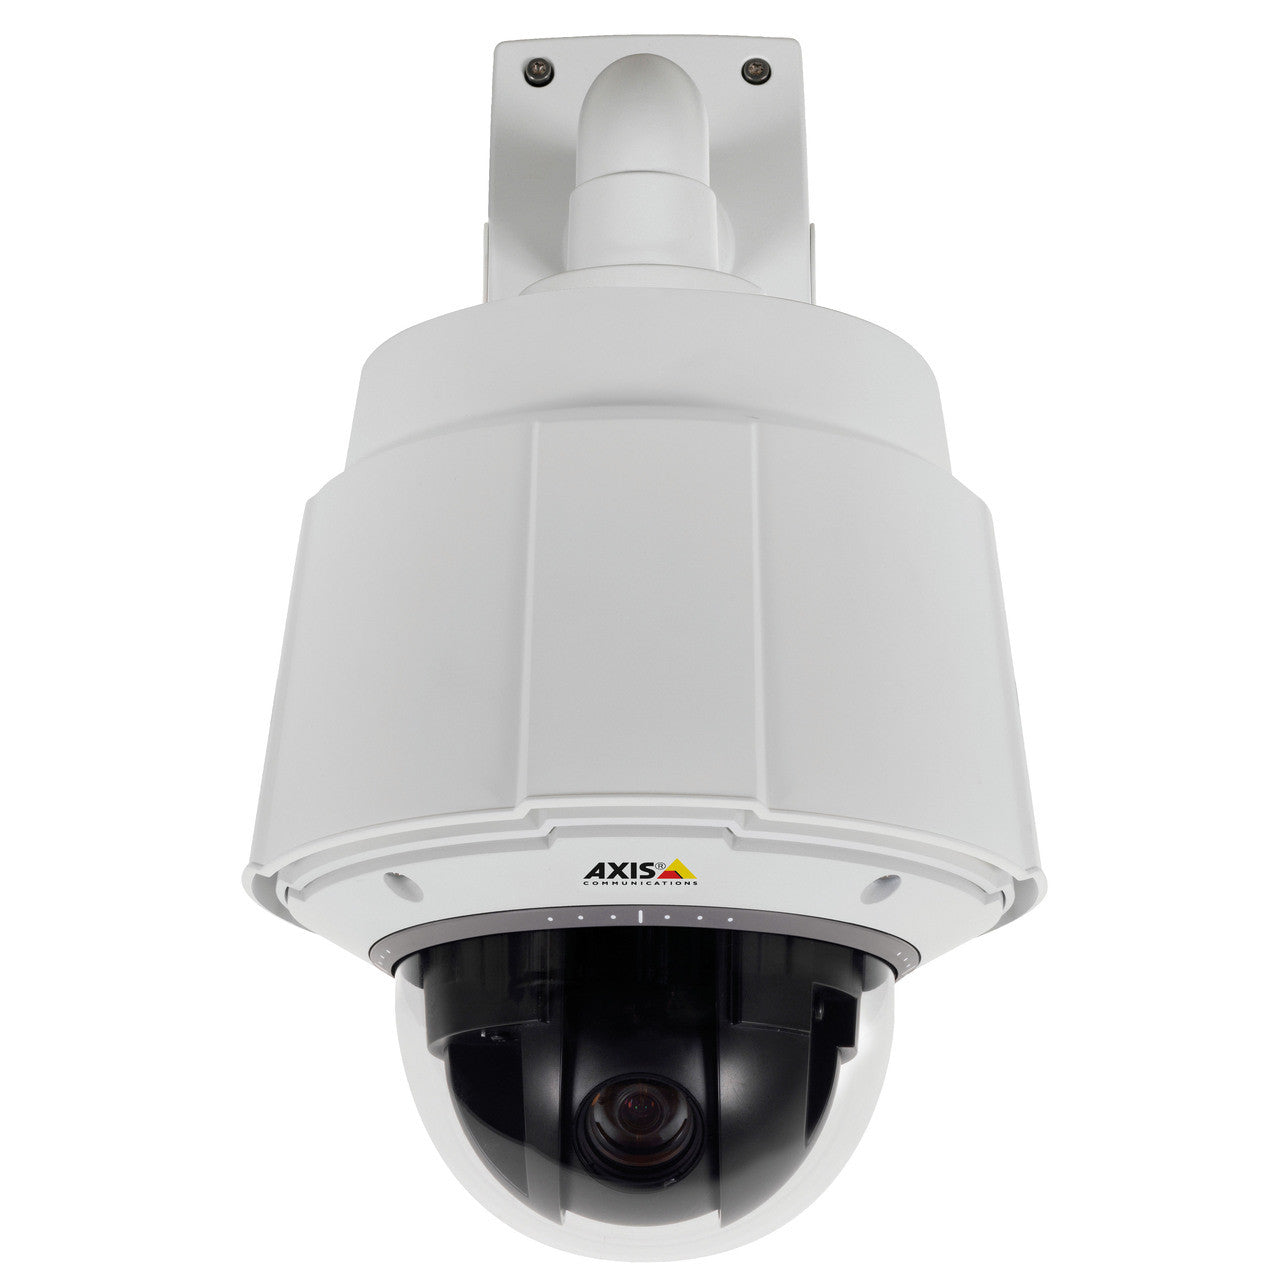 AXIS Q6042-C with optional T91A61 Wall Bracket